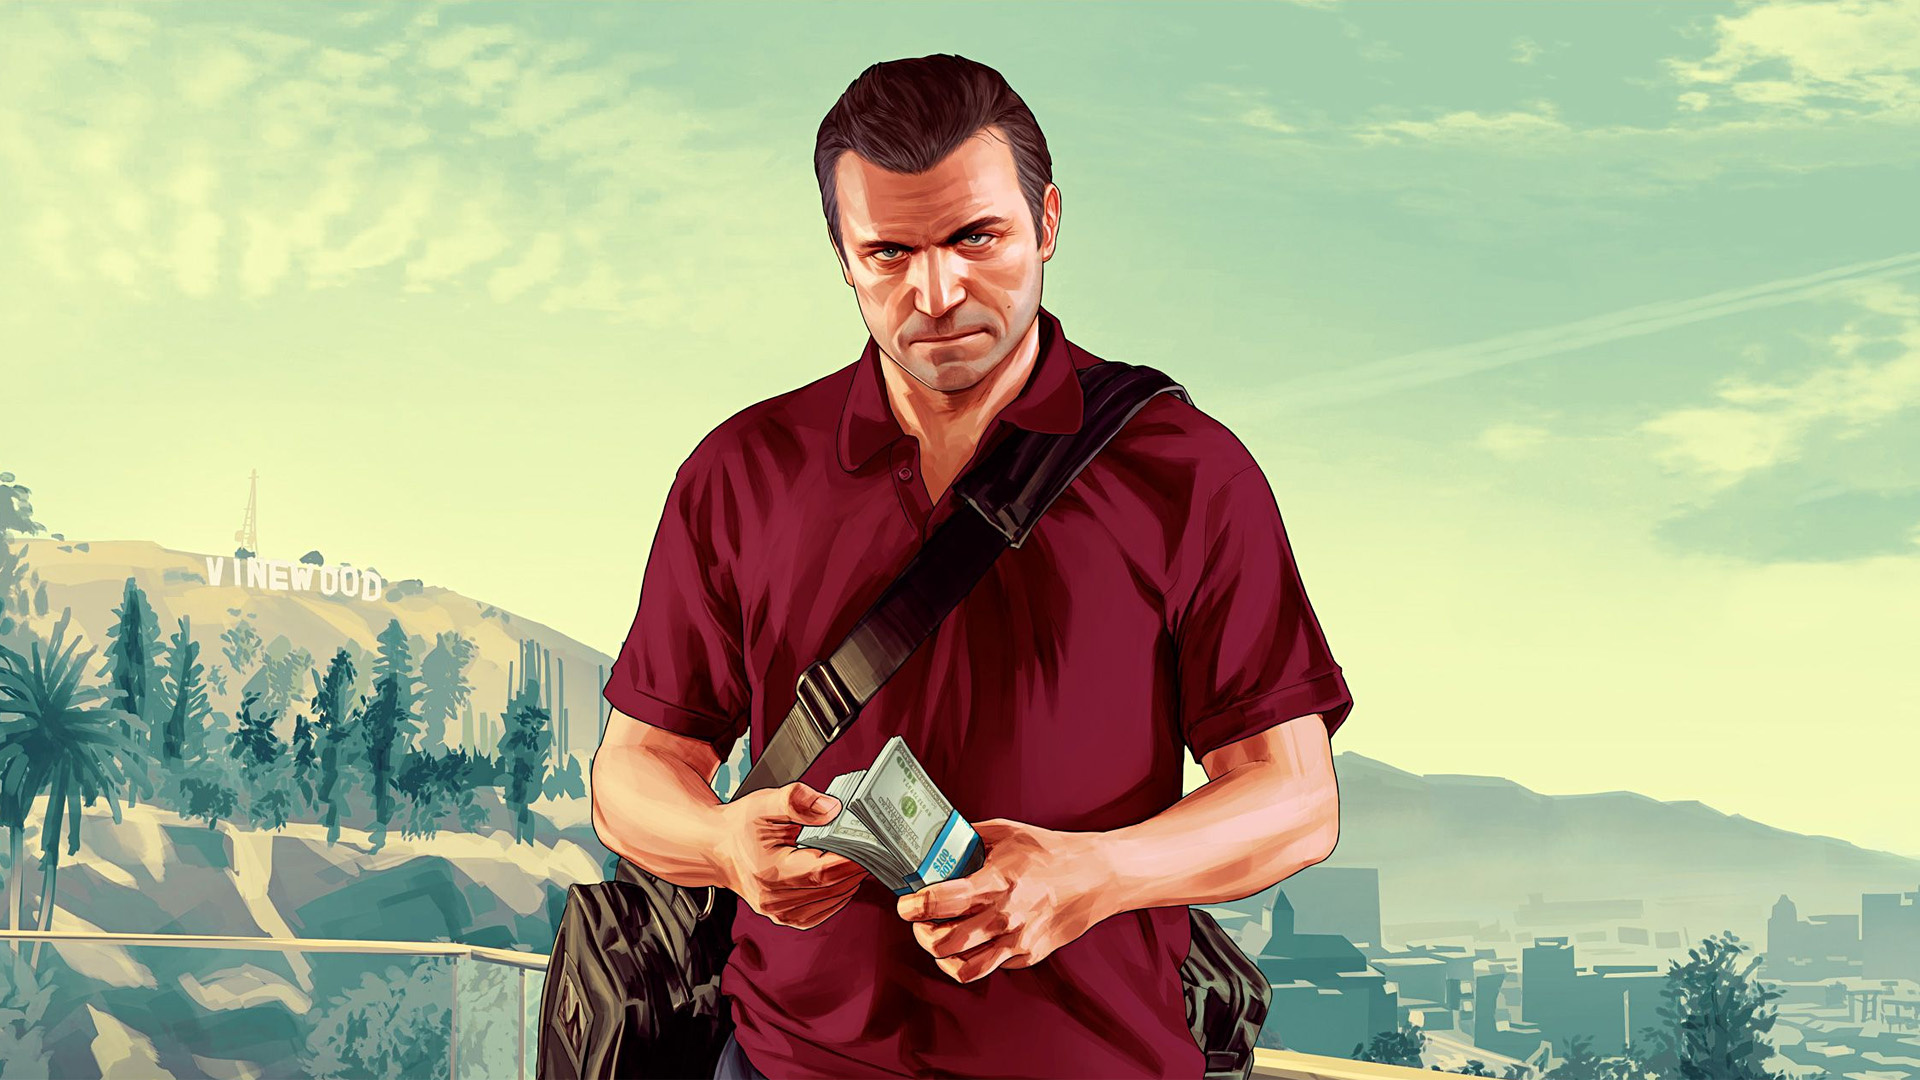 Take-Two as independent publisher, GTA V success, Gaming industry insights, 1920x1080 Full HD Desktop